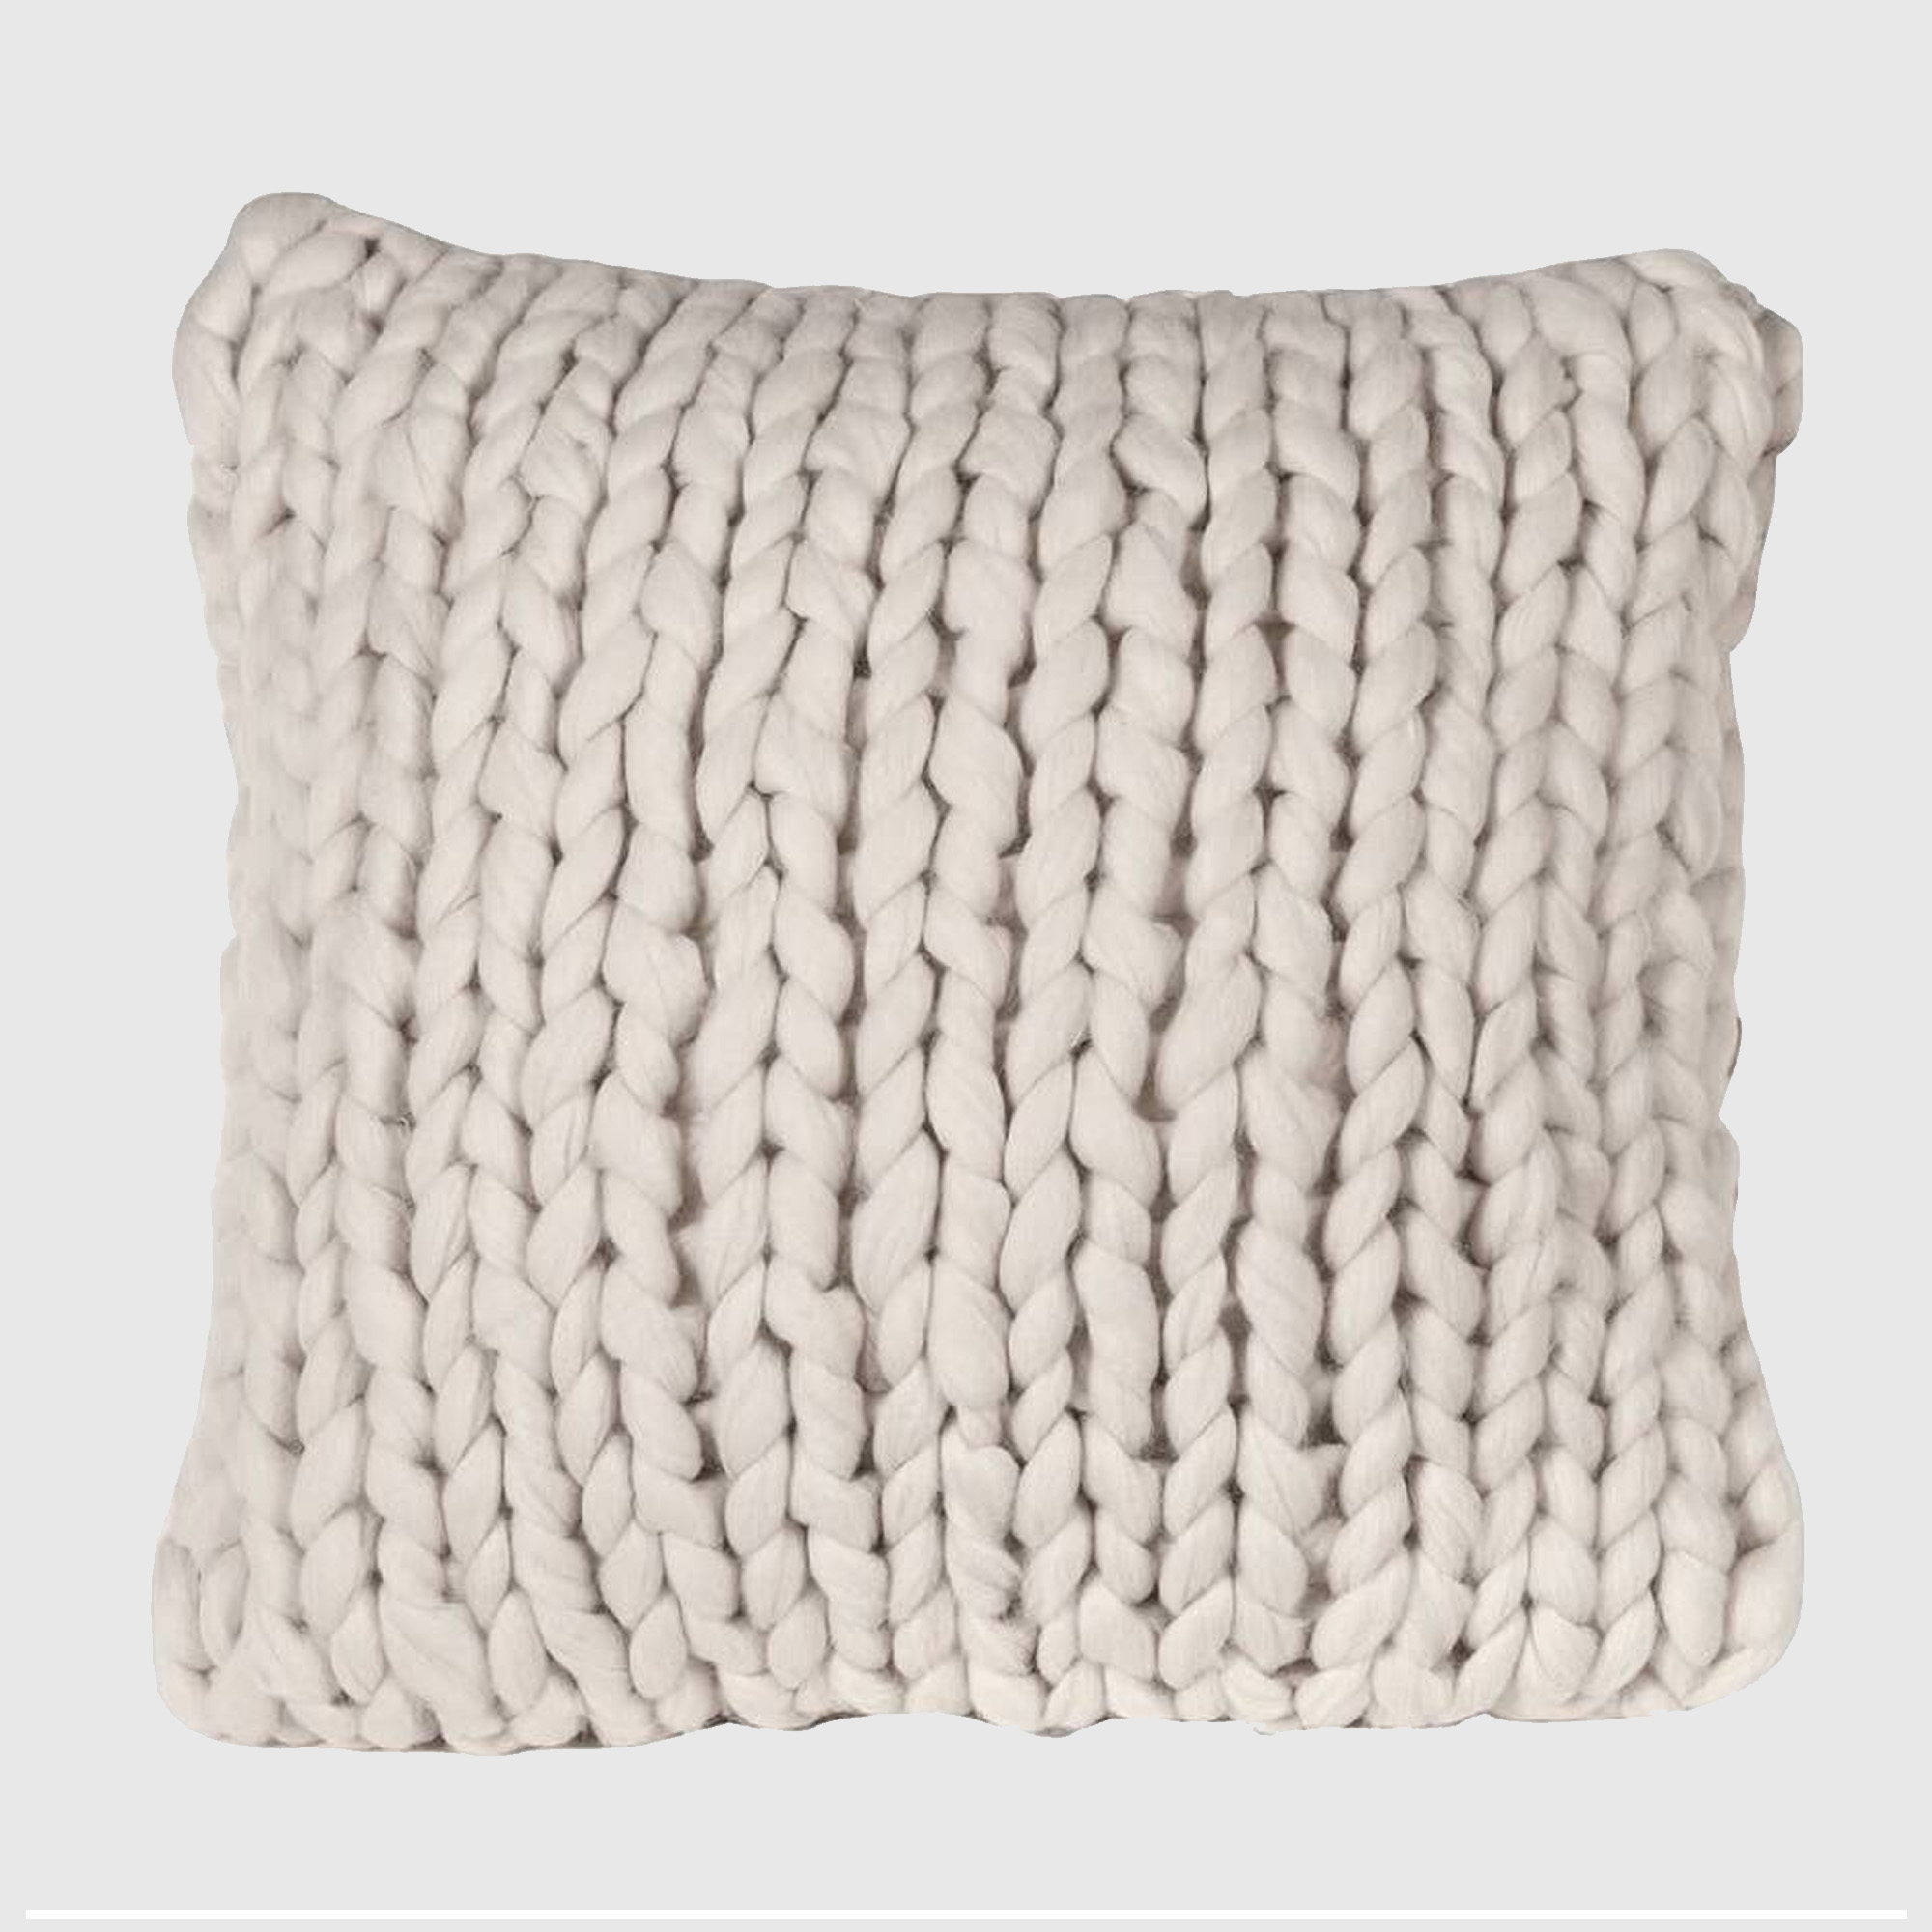 BEIGE CHUNKY KNIT CUSHION, Square, Neutral | Barker & Stonehouse